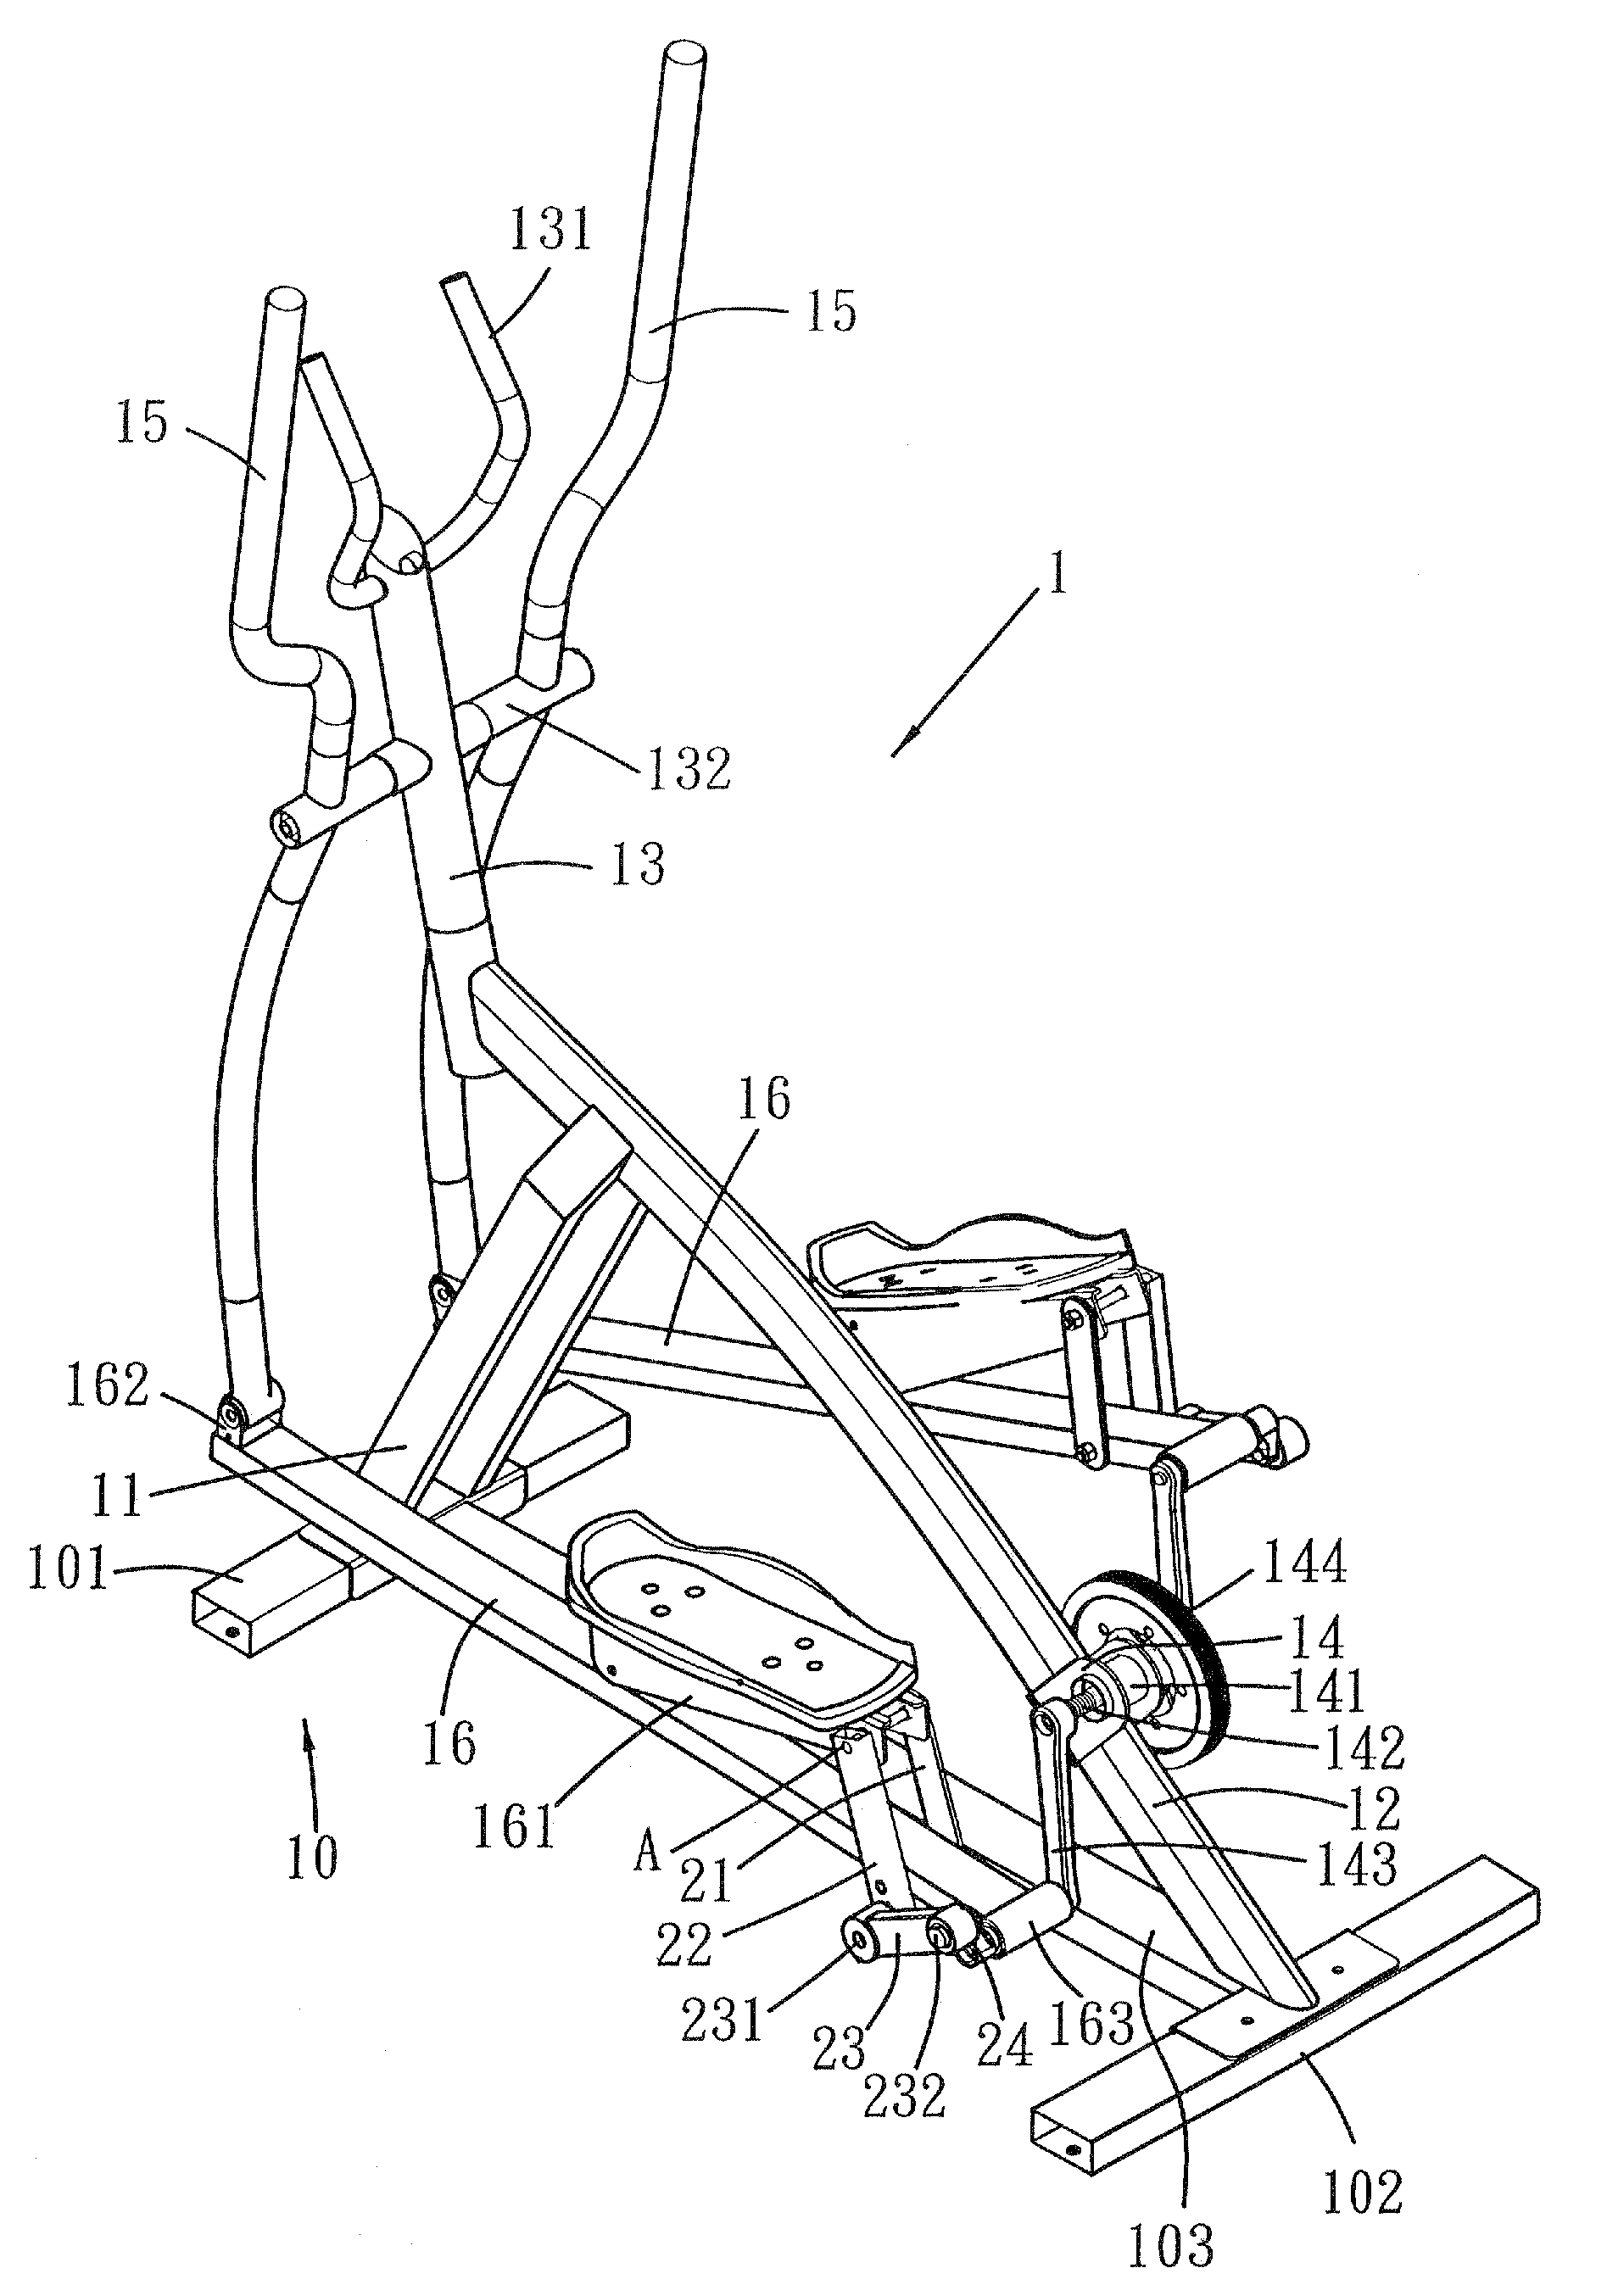 Elliptical excise apparatus capable of increase exercise distance